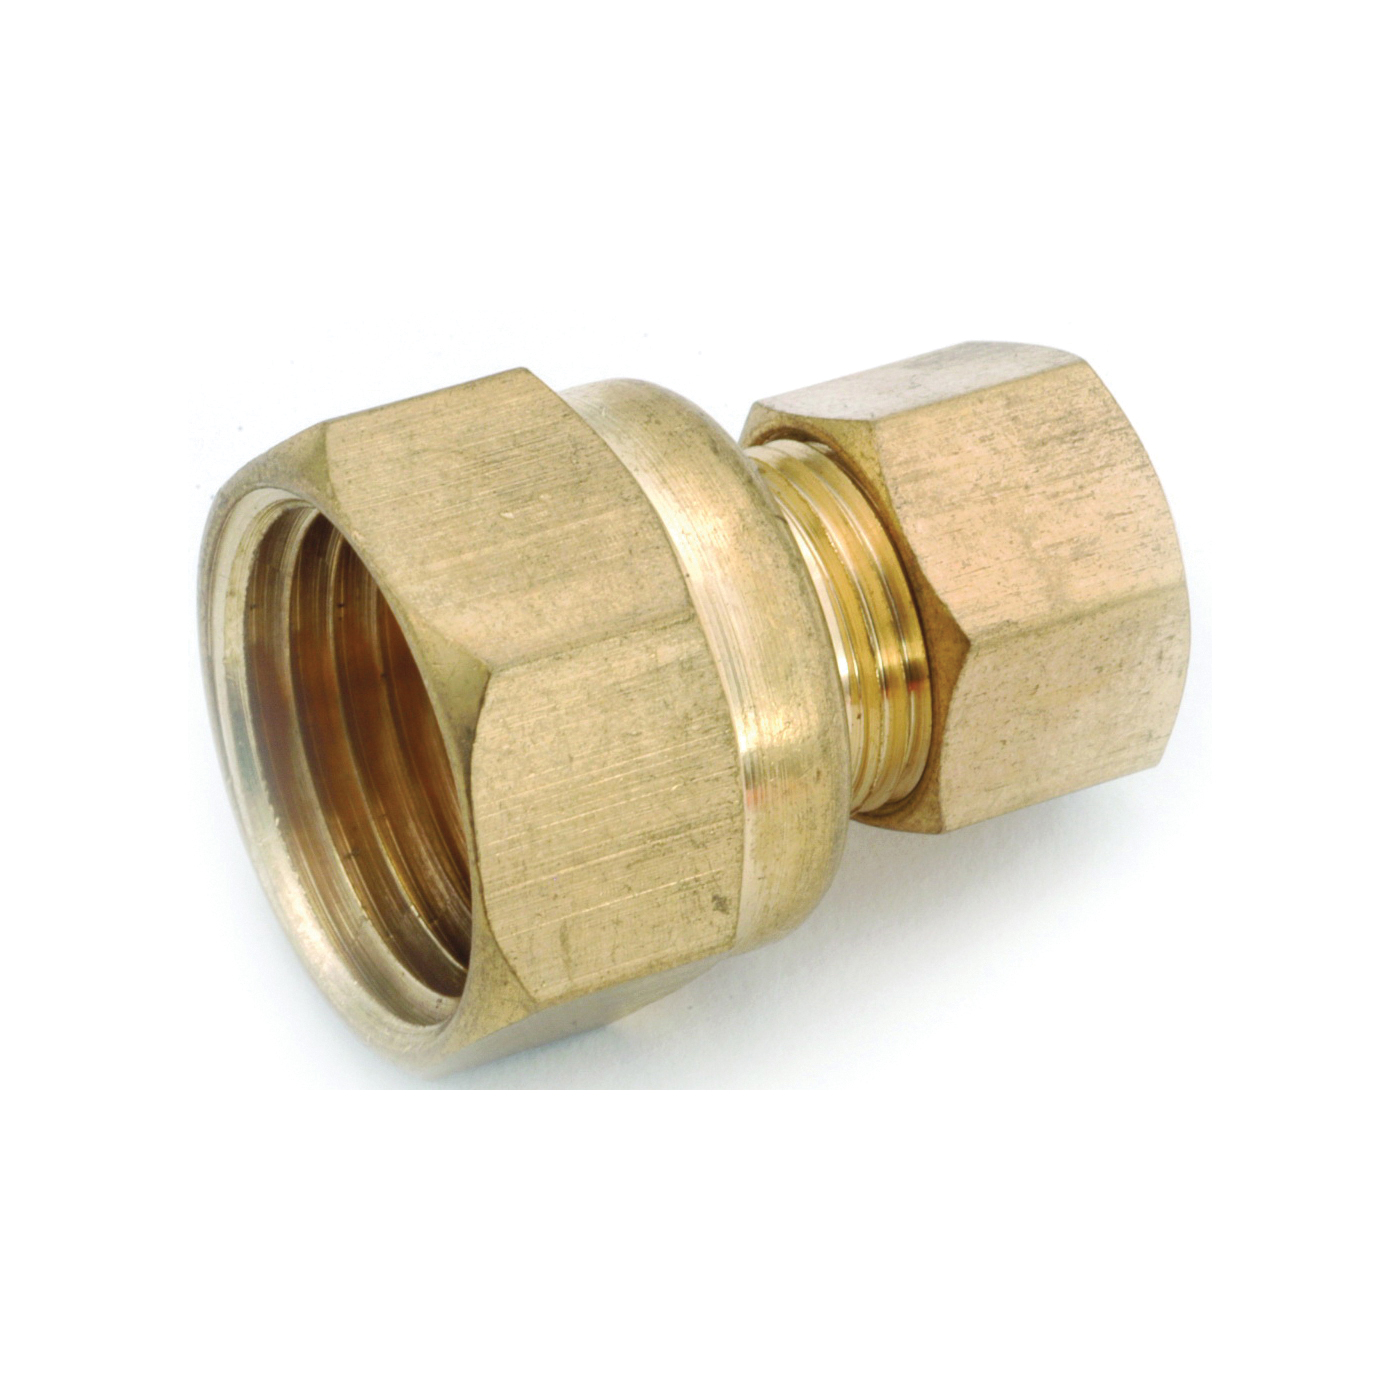 750097-0806 Tube Adapter, 1/2 x 3/8 in, Compression, Brass